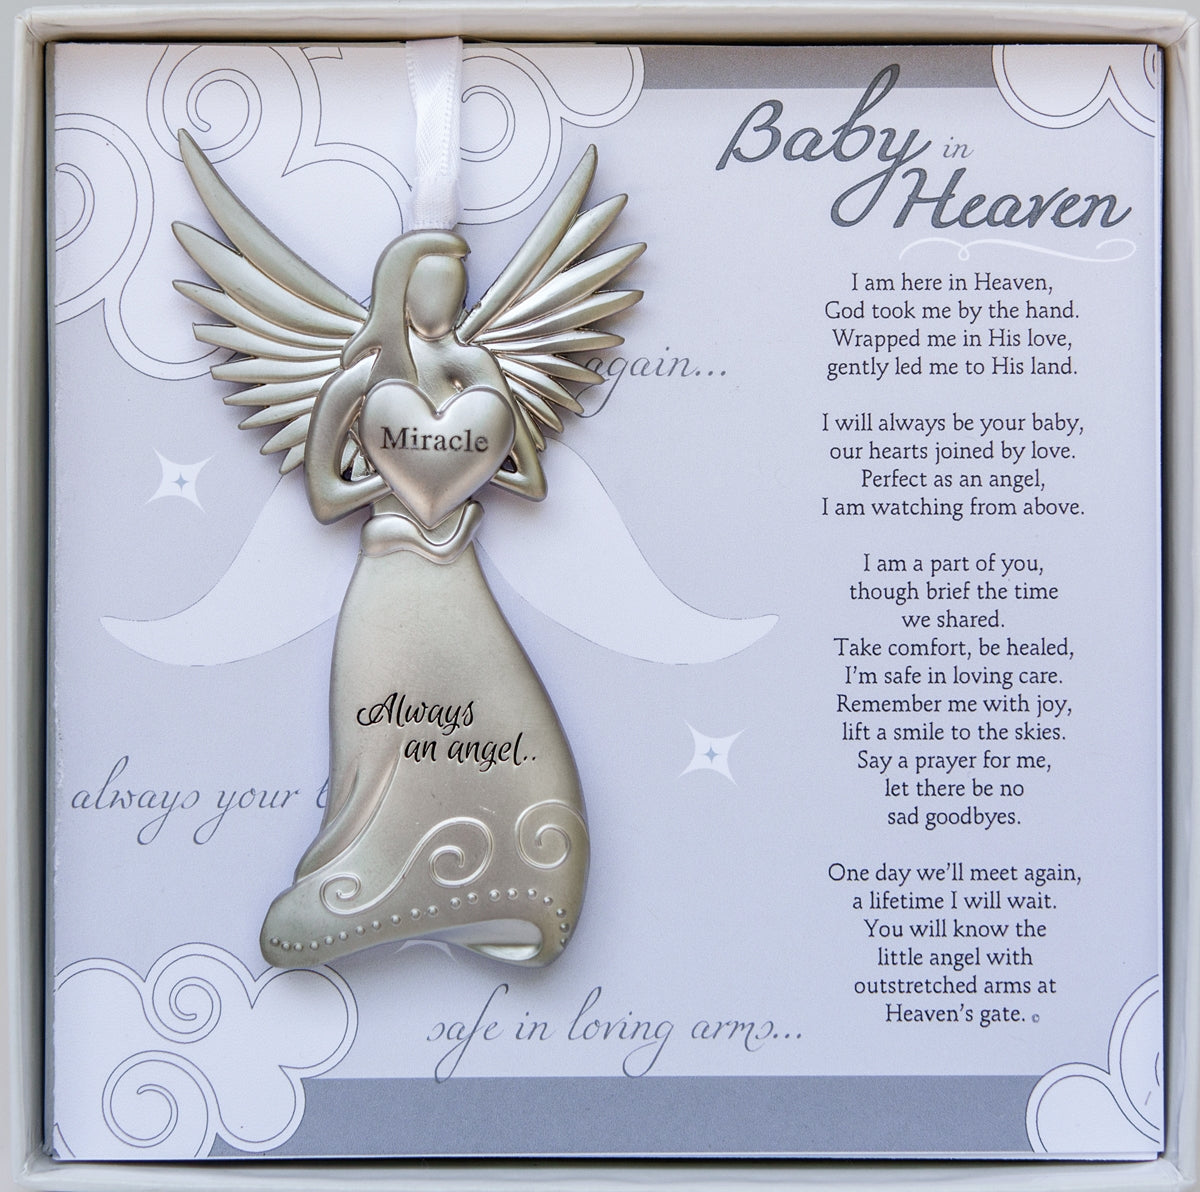 Infant Loss Memorial Gift - 4" metal miracle angel ornament with "Baby in Heaven" poem card in white box with clear lid